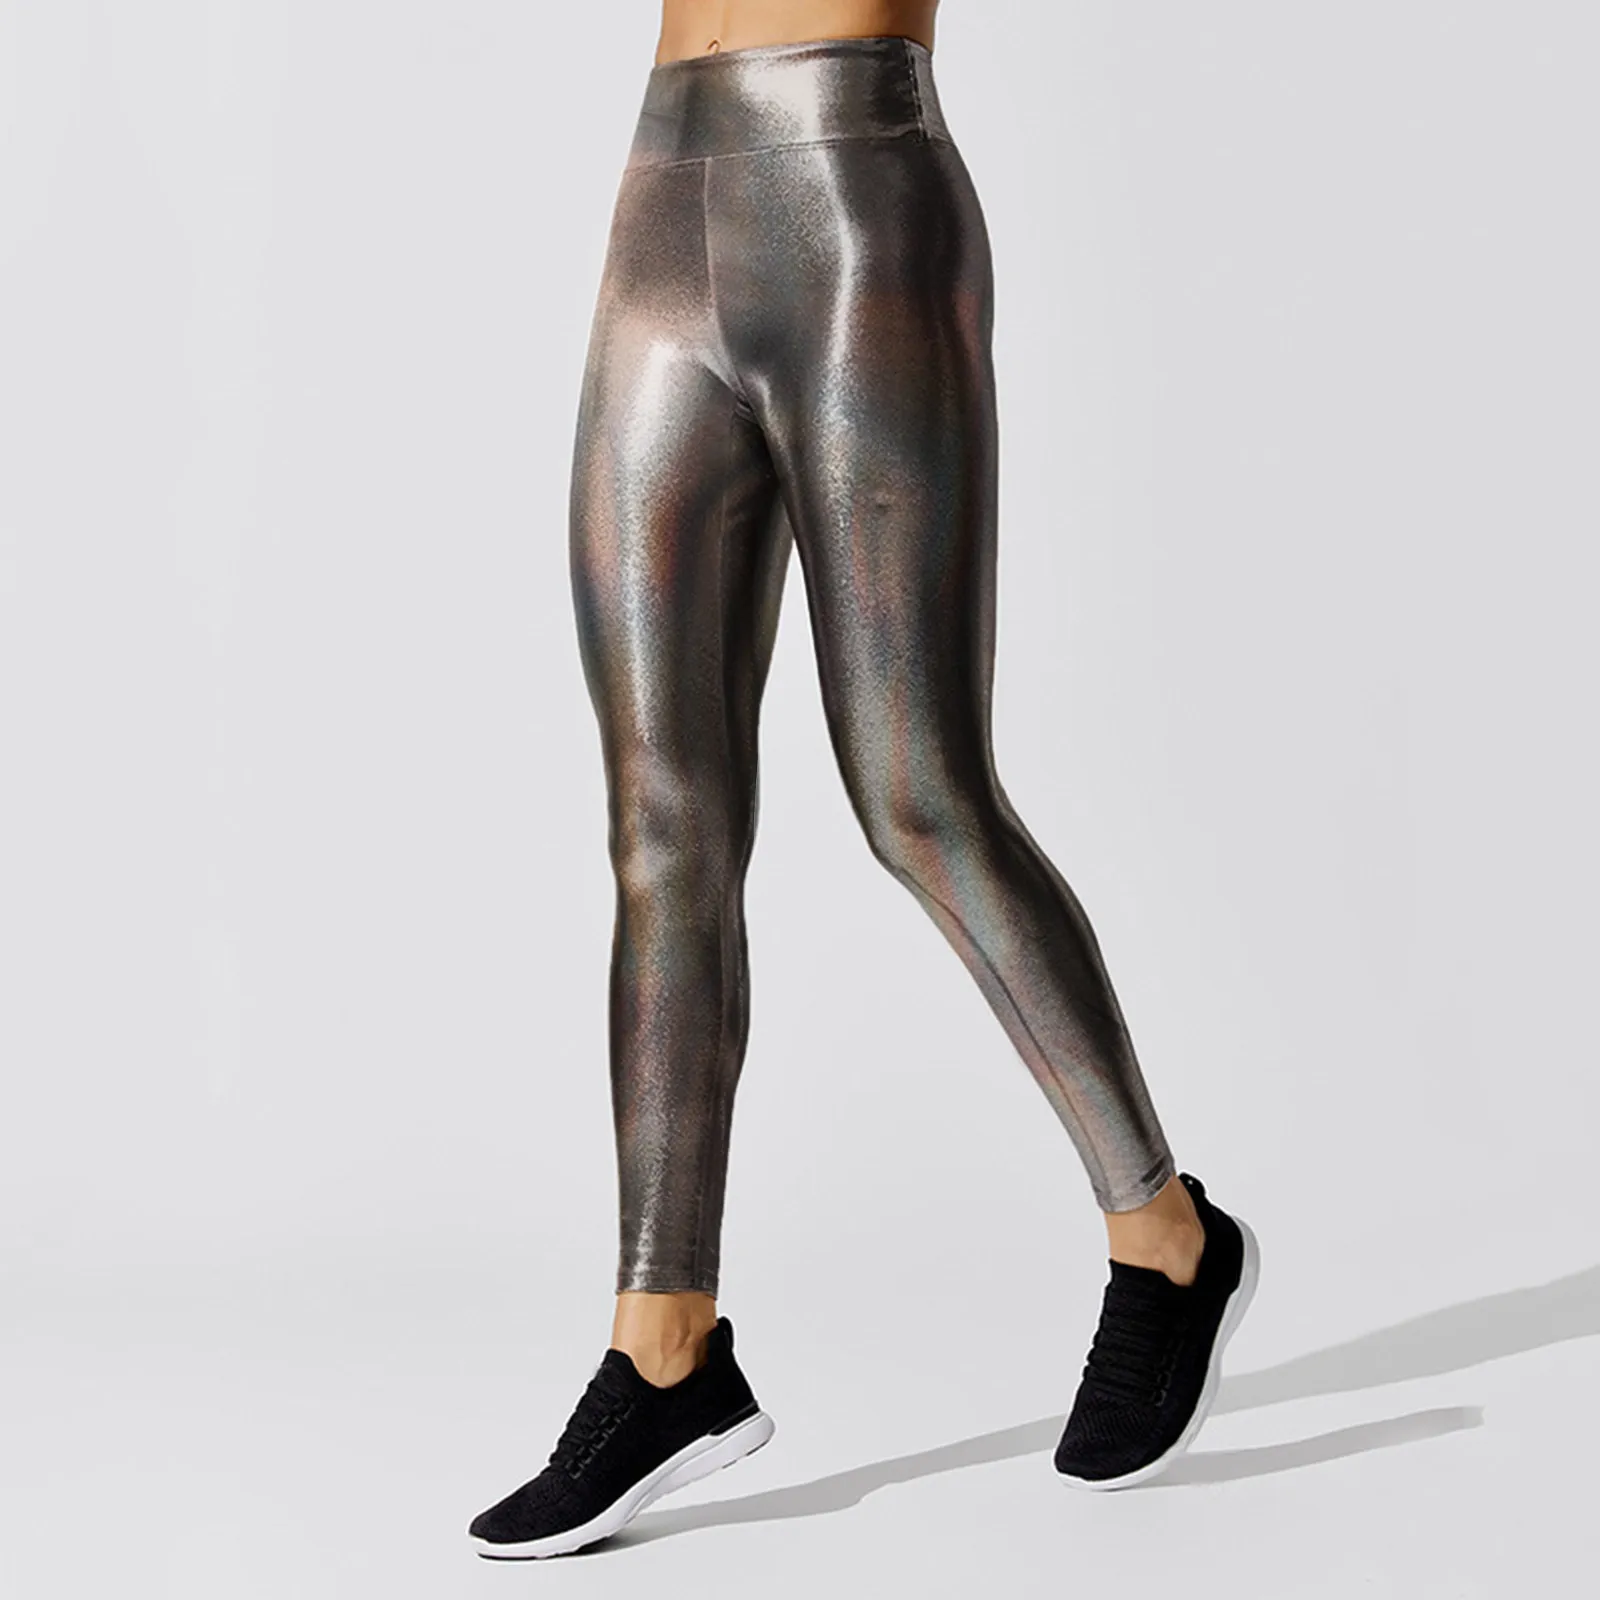 

Women's Stretchy Faux Leather Leggings Sexy High Waisted Solid Color Casual Patent Leather Hot Stamping Yoga Pants Tight Pants